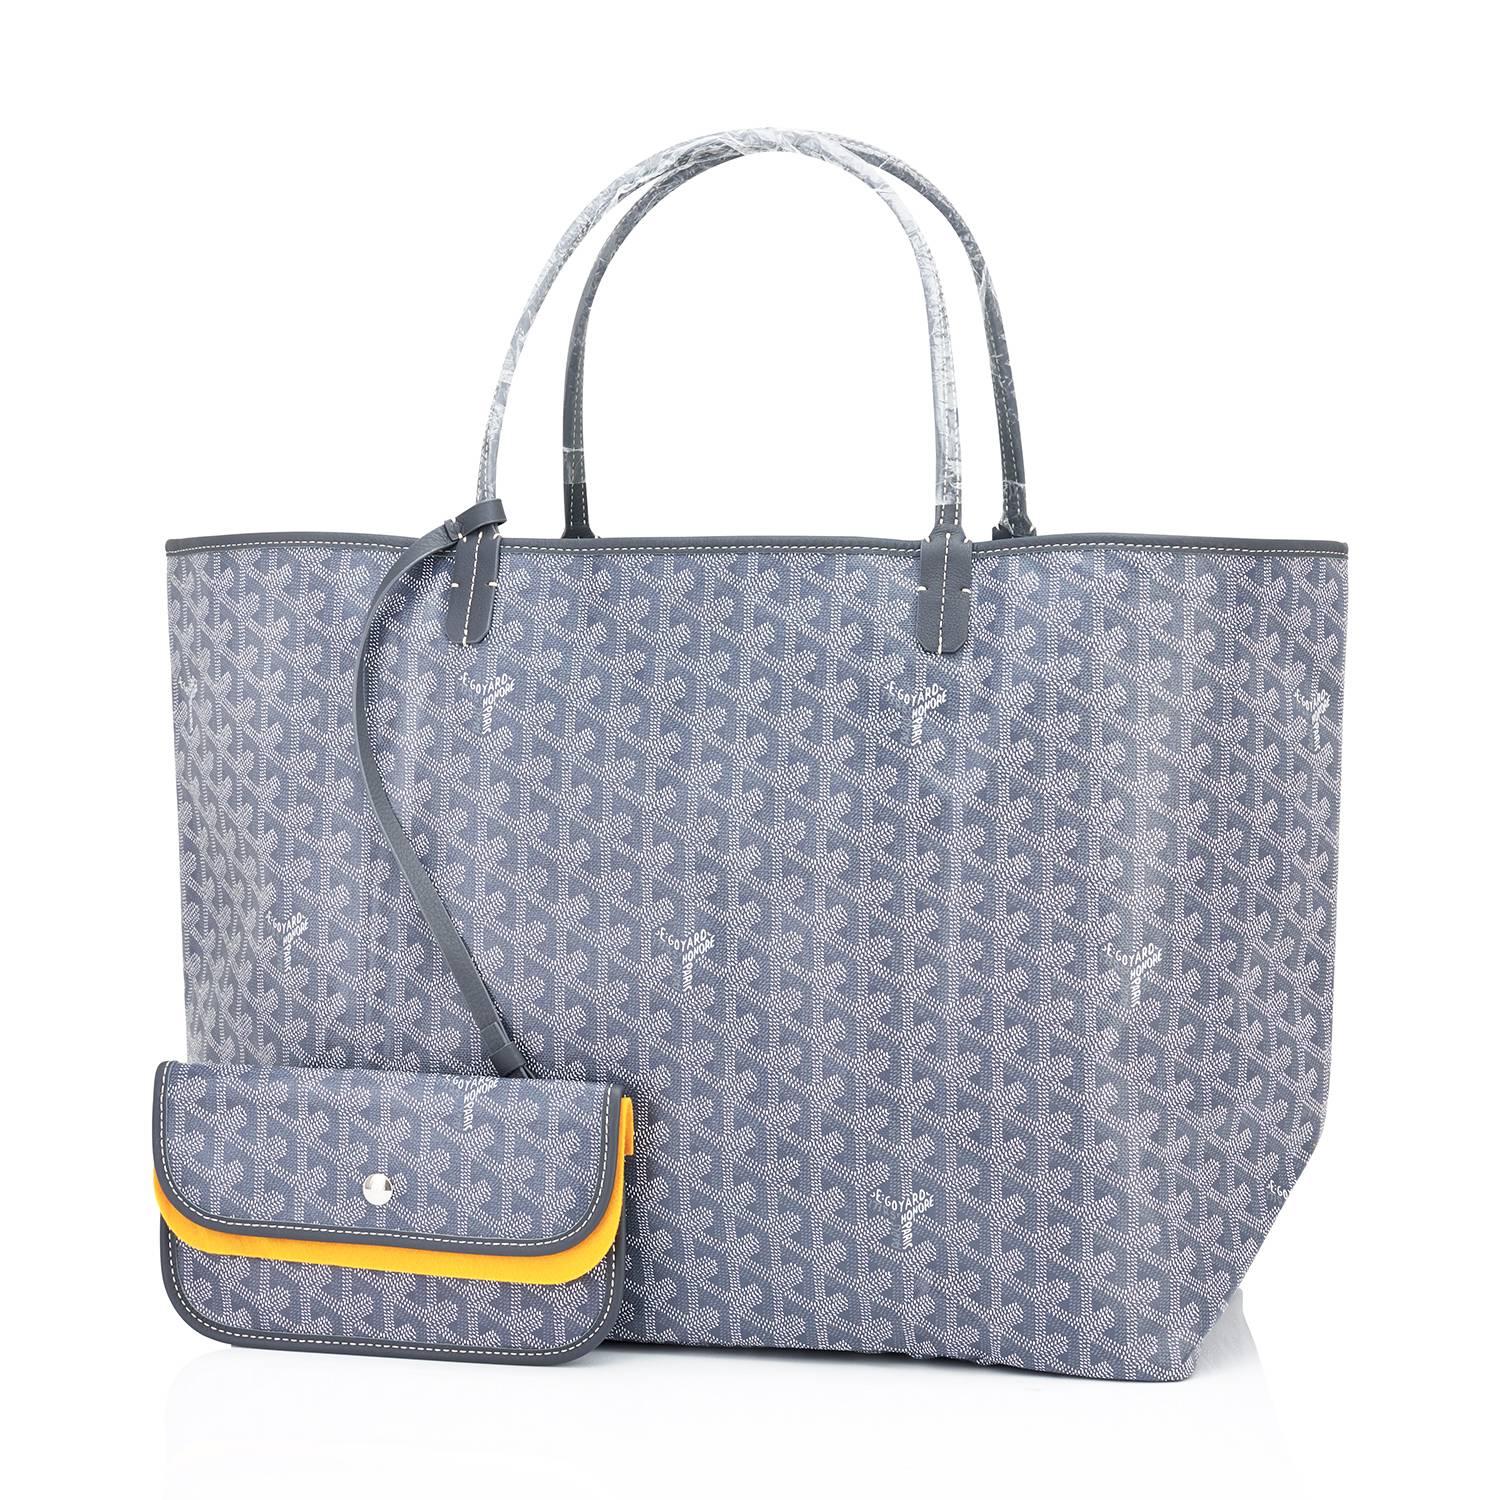 Goyard Grey St Louis GM Chevron Tote Bag 
Brand New.  Store Fresh. Pristine Condition (with plastic on handles) 
Perfect gift! Comes with yellow Goyard sleeper and inner organizational pochette. 
This is the famous Goyard Chevron Tote in the highly